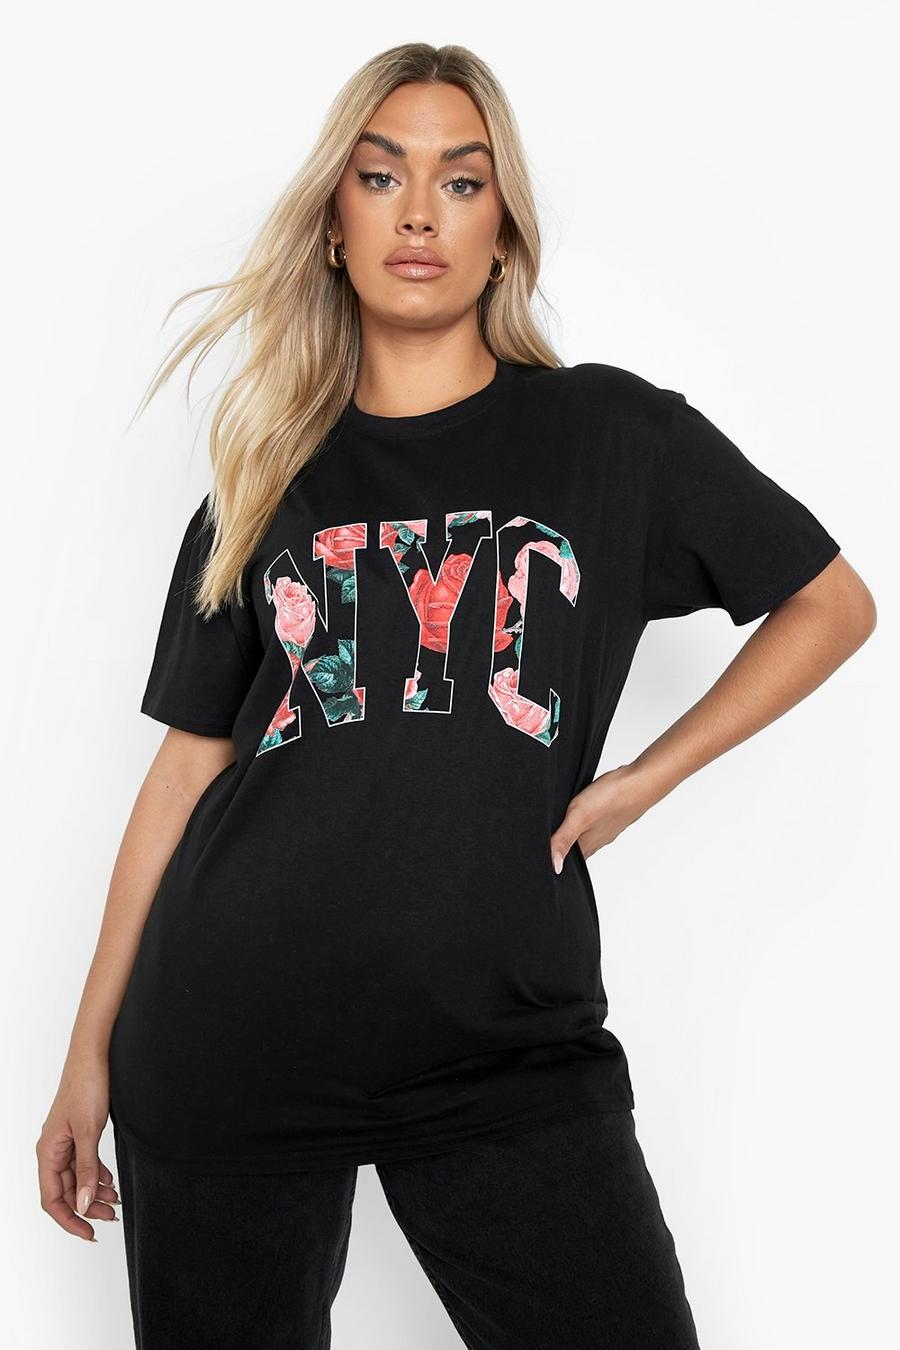 T-shirt Plus Size a fiori NYC, Black nero image number 1